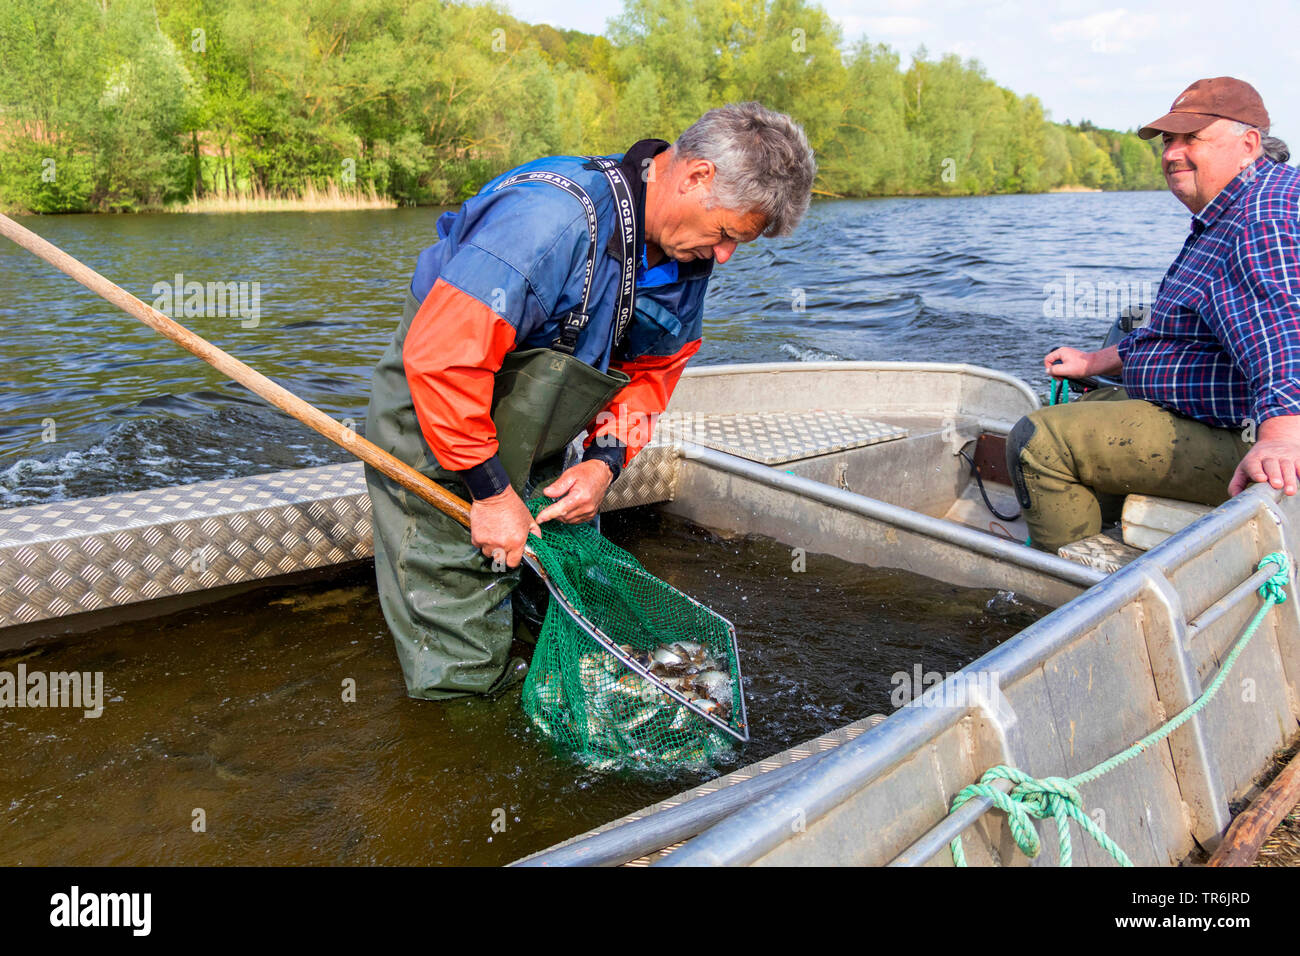 bow net fishing in a lake, caught fishes are sorted, Germany, Bavaria, Brombachspeichersee Stock Photo